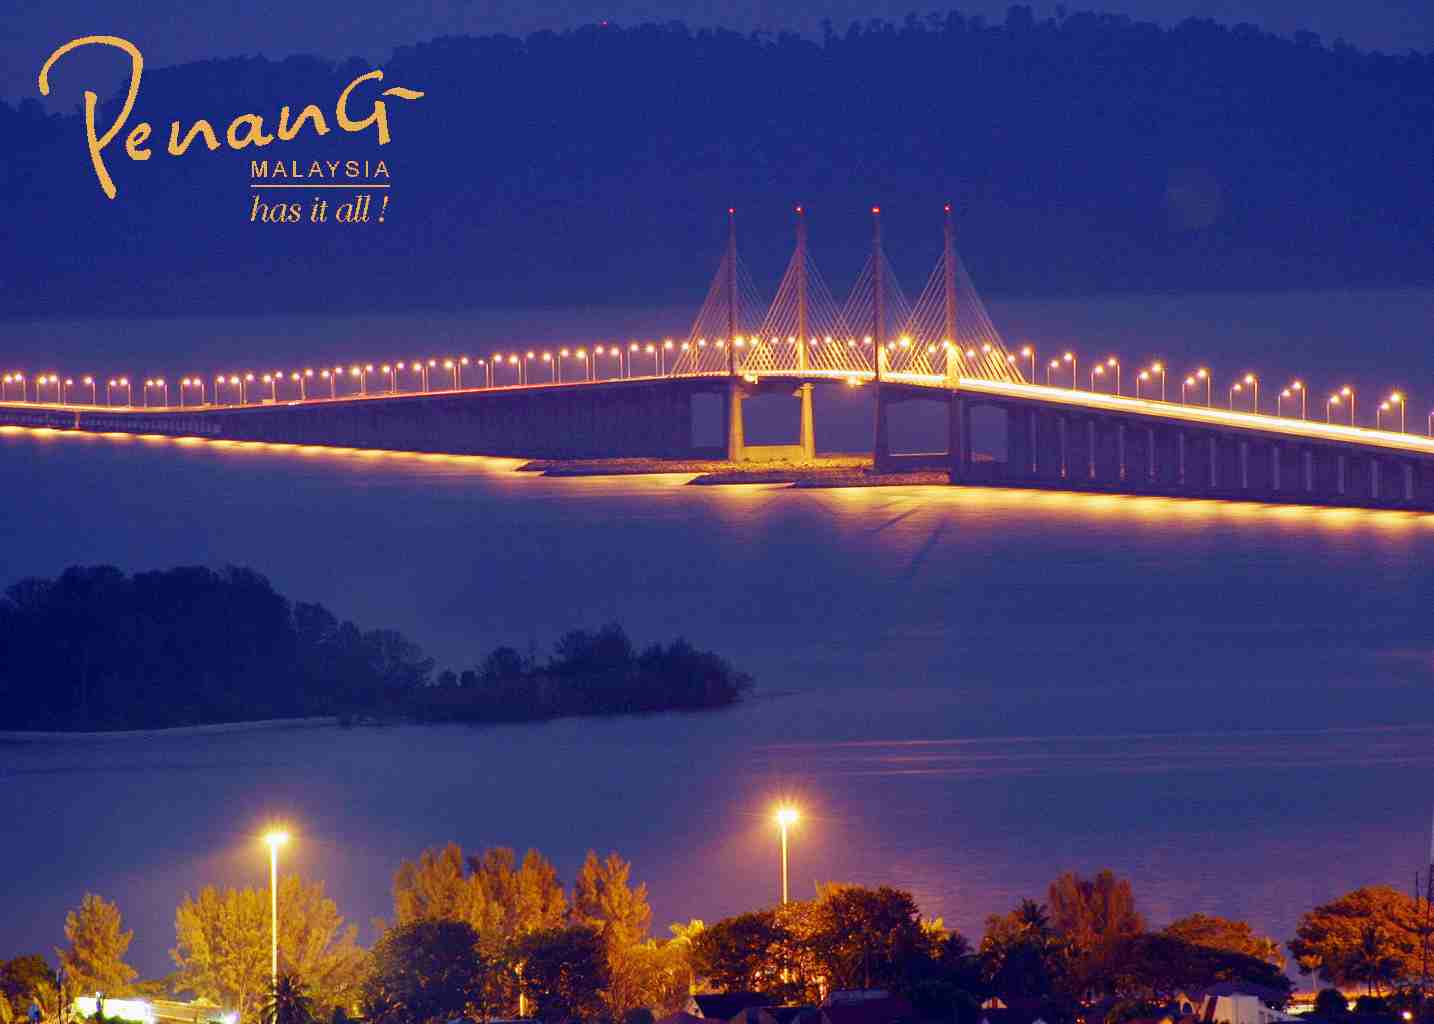 welcome to my blog: Beautiful place- Penang